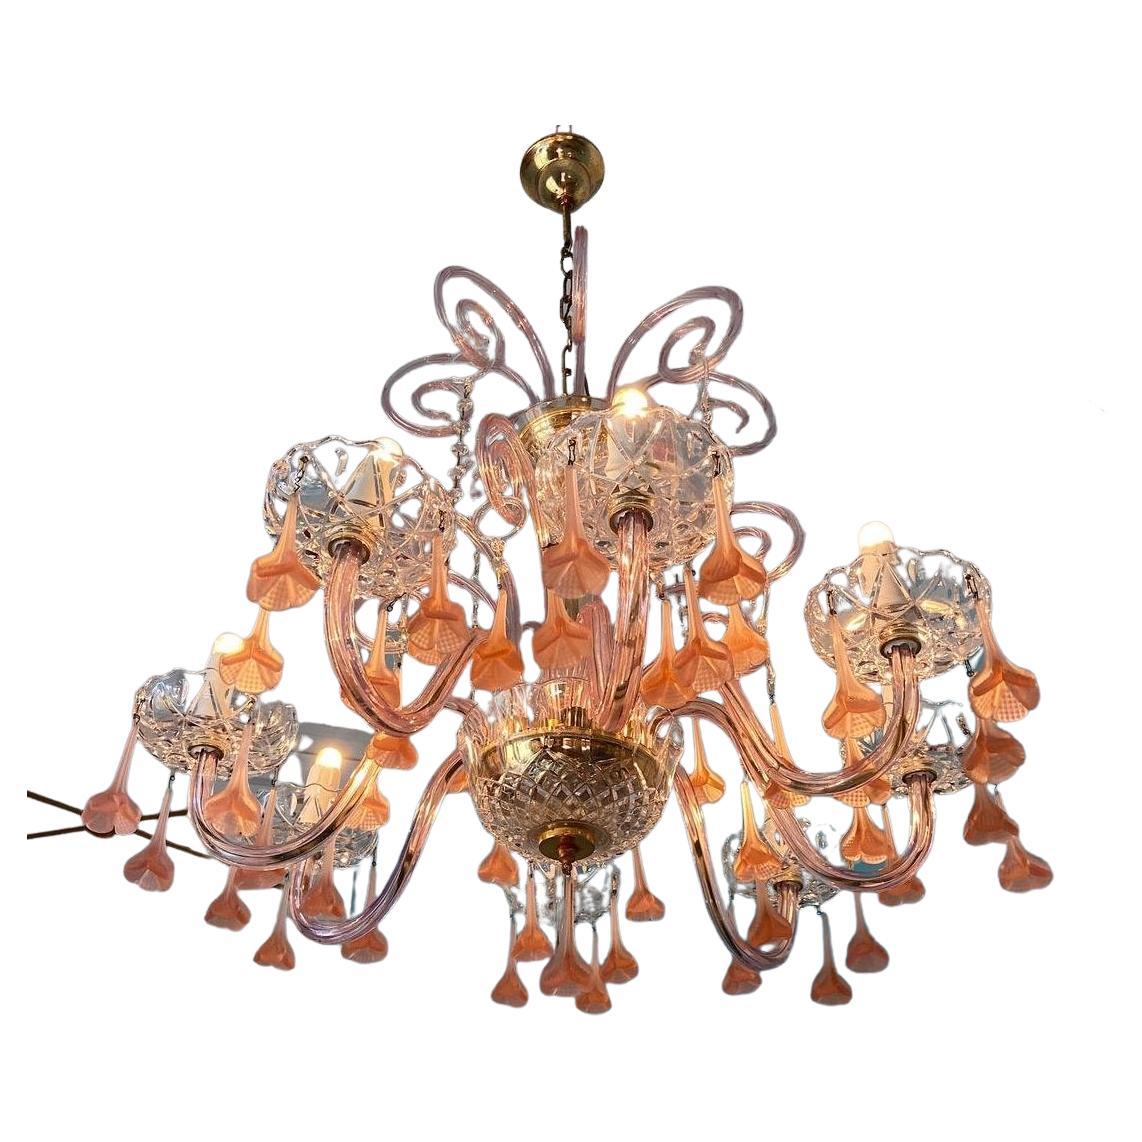 1980s Murano glass chandelier with pink flowers. This light will make any room blossom. 8 light bulbs.
  